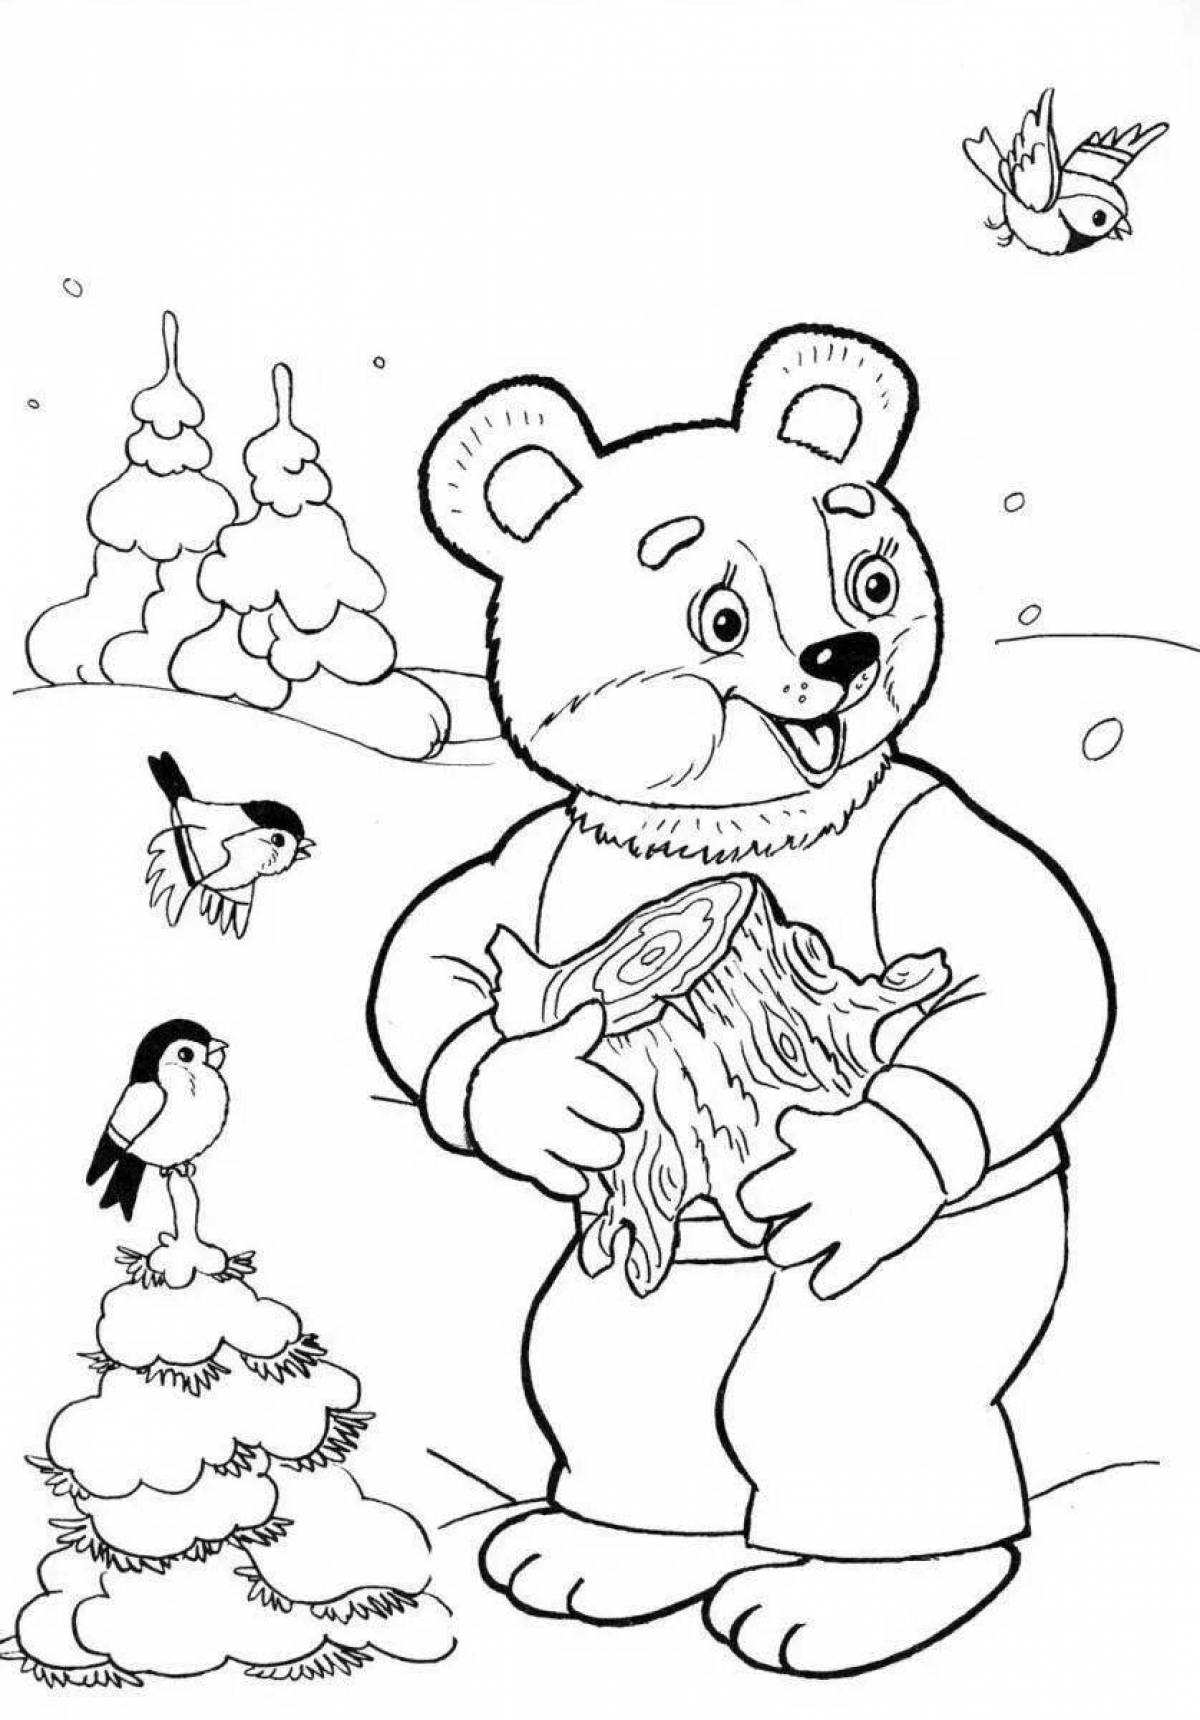 Wonderful winter animals coloring book for 3-4 year olds